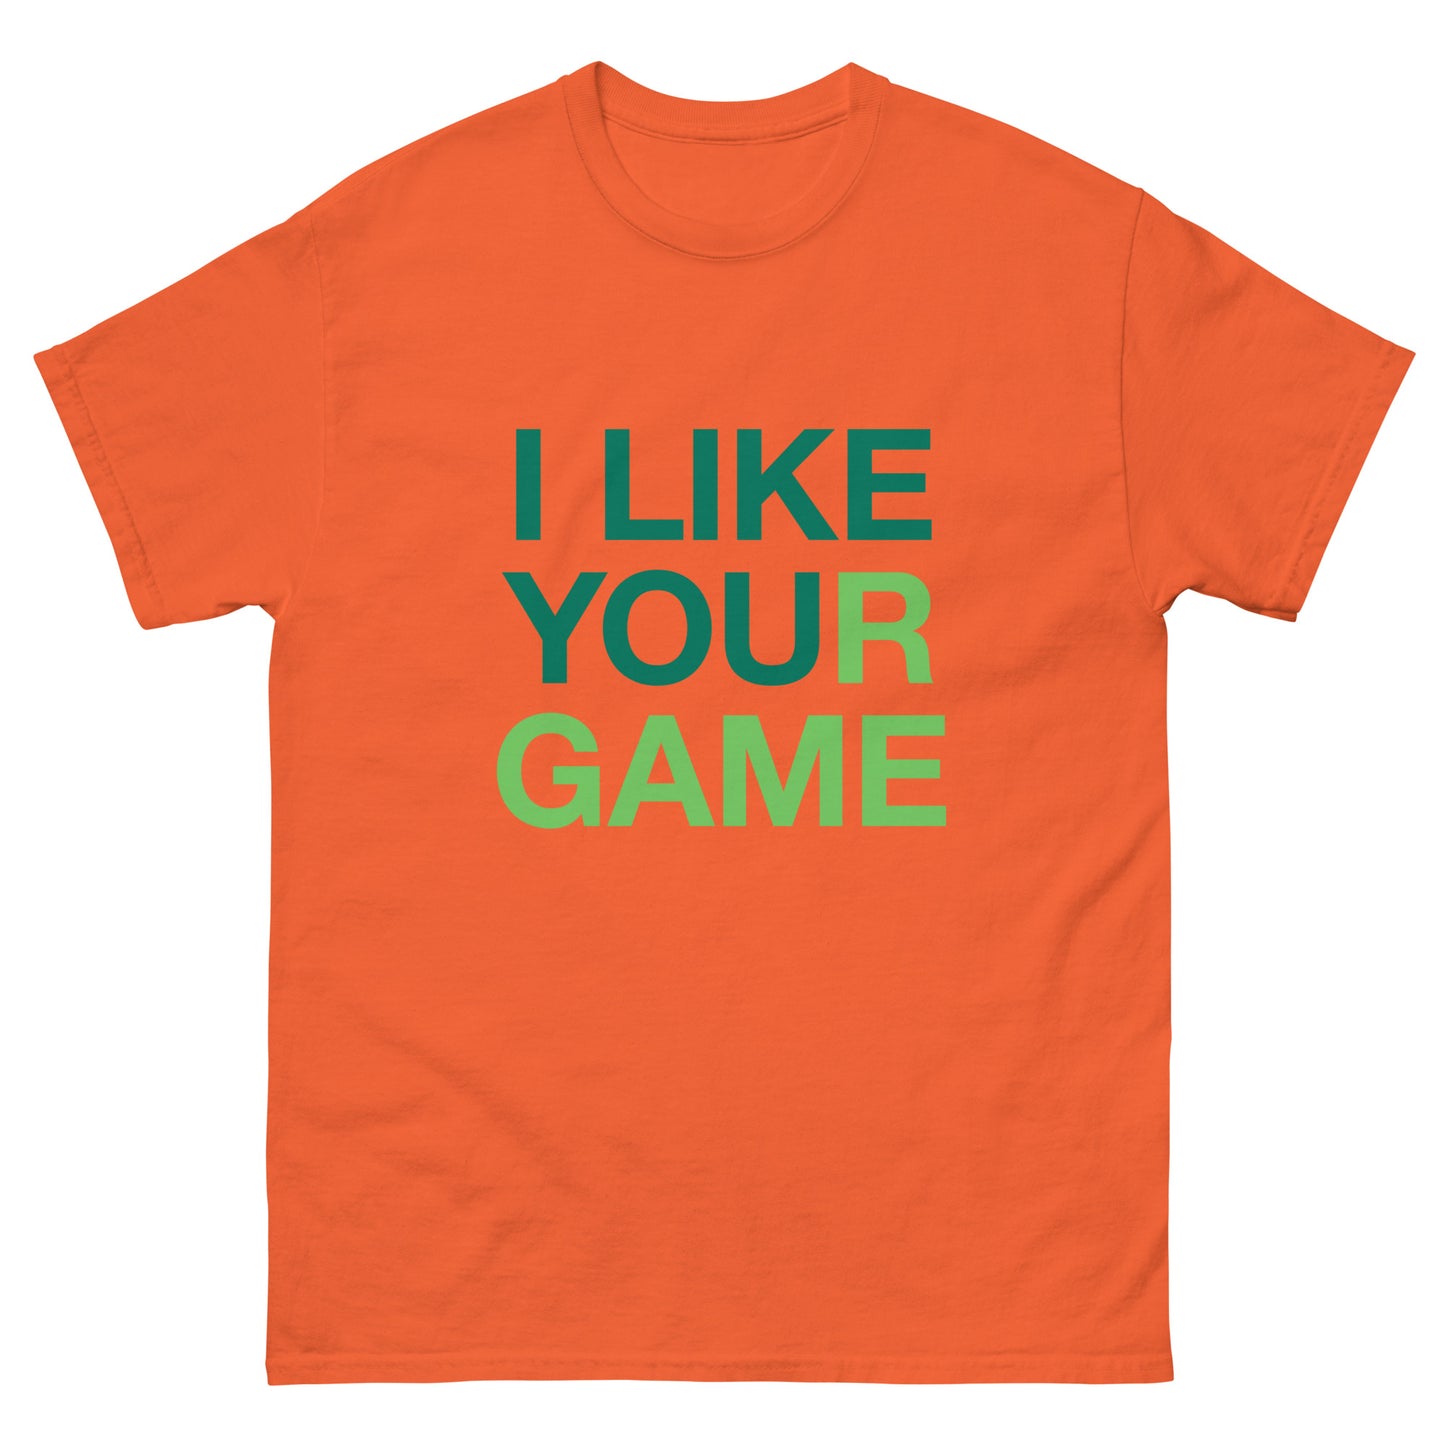 I LIKE YOUR GAME Men's classic tee